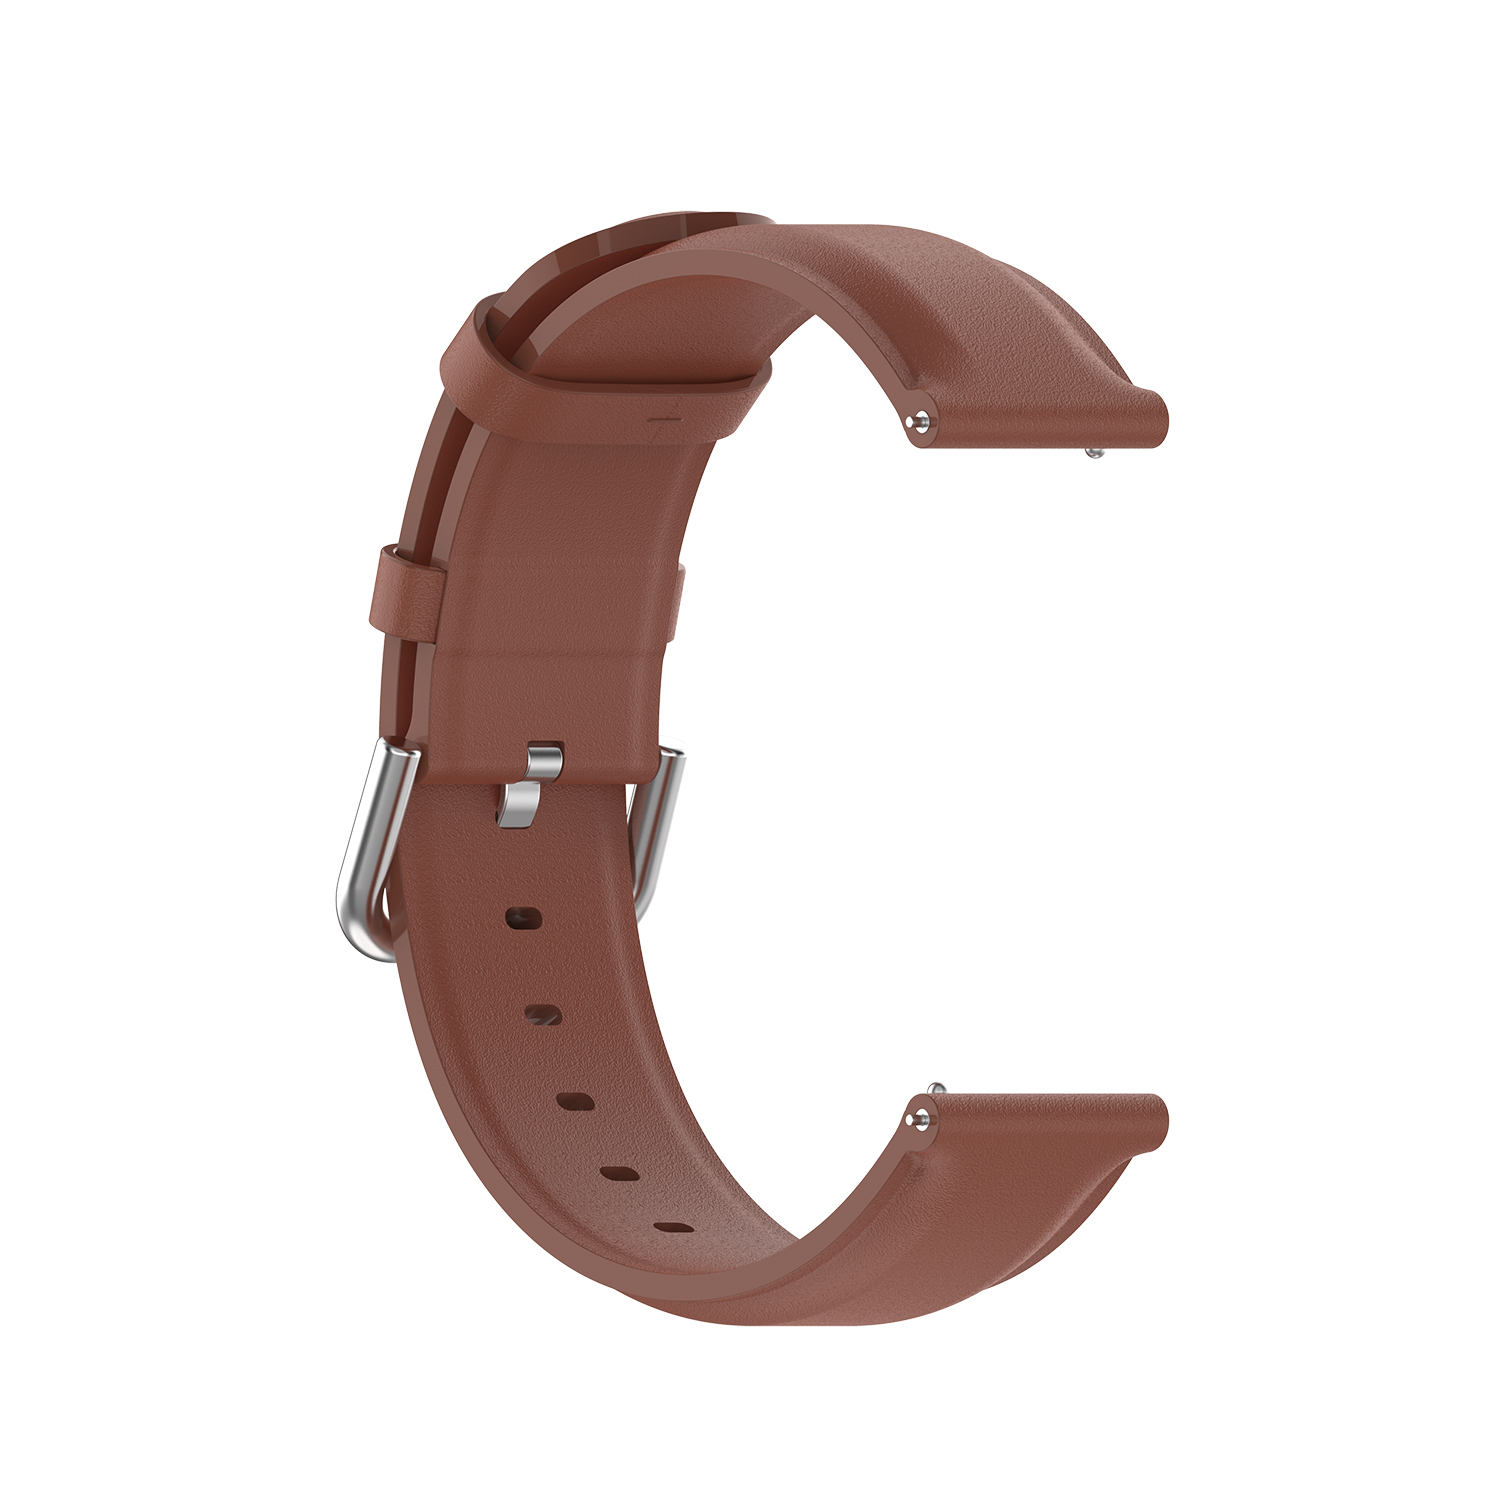 Bakeey-2022mm-Width-Universal-Casual-PU-Leather-Watch-Band-Strap-Replacement-for-Samsung-Galaxy-watc-1734852-14